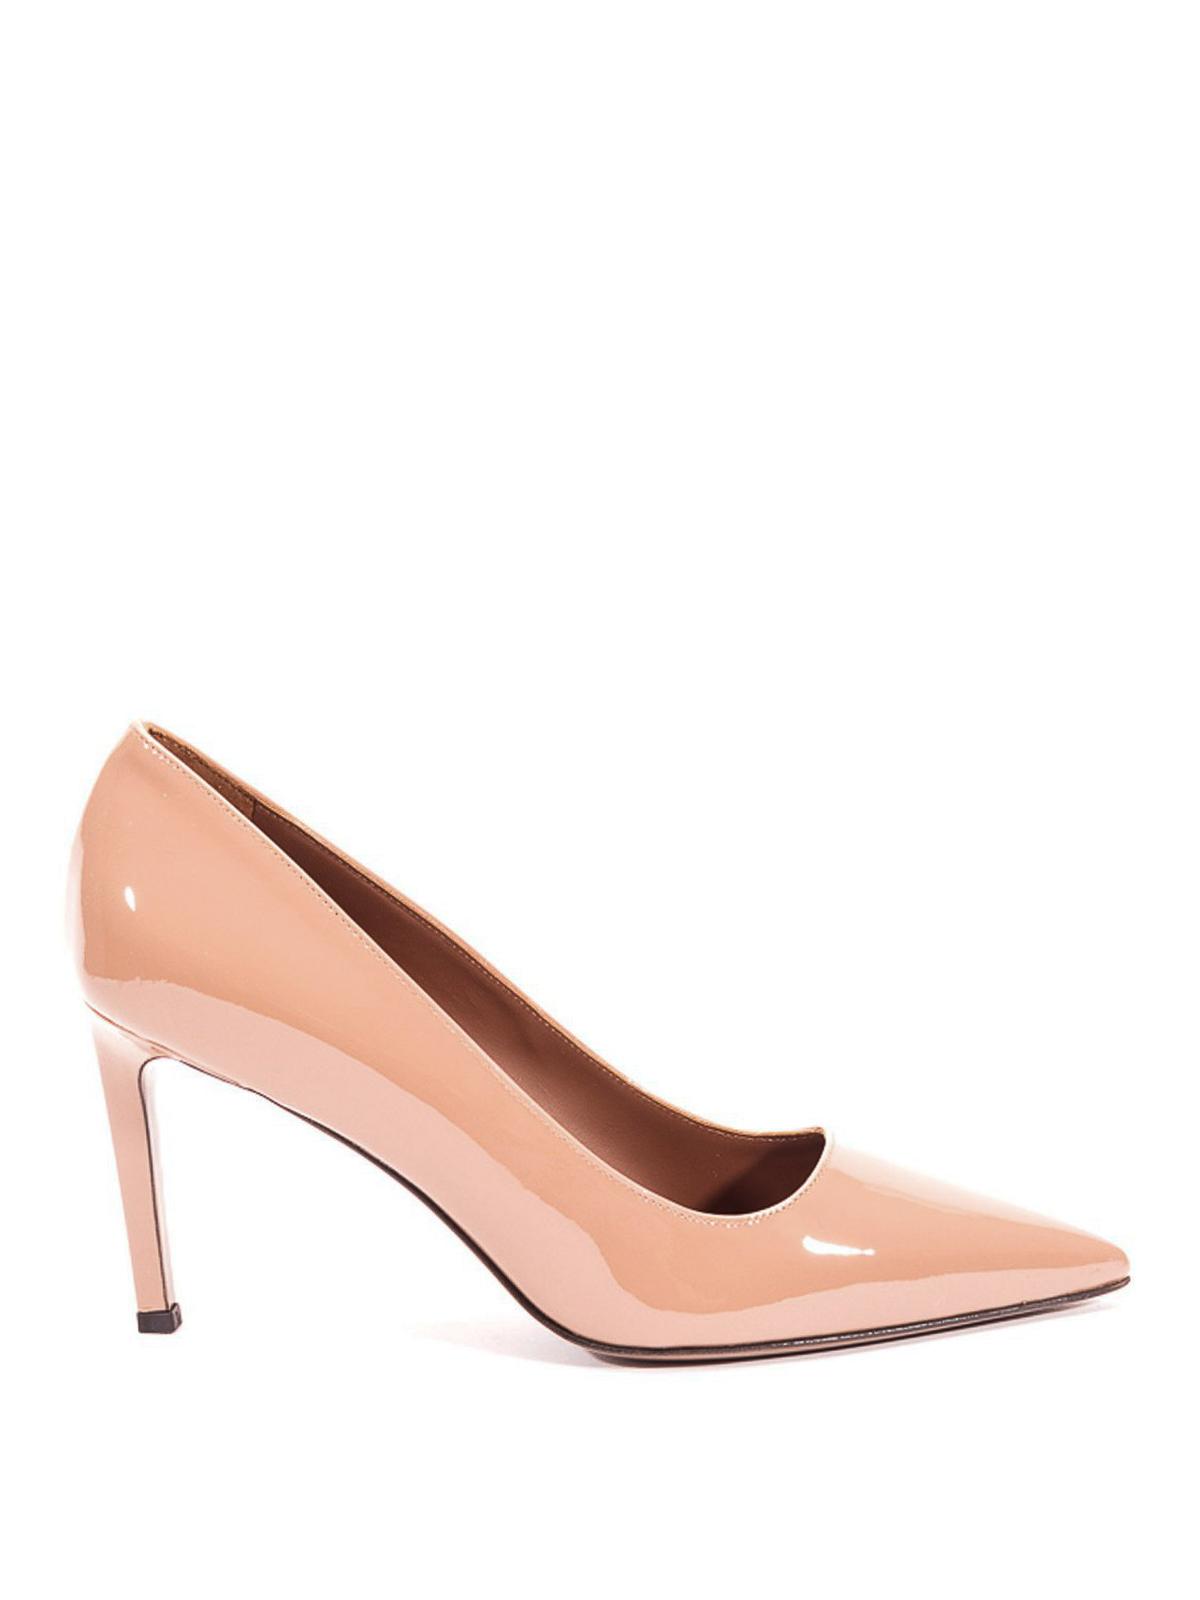 Gina Nude Beige Patent Leather Strappy Platform Sandals in 